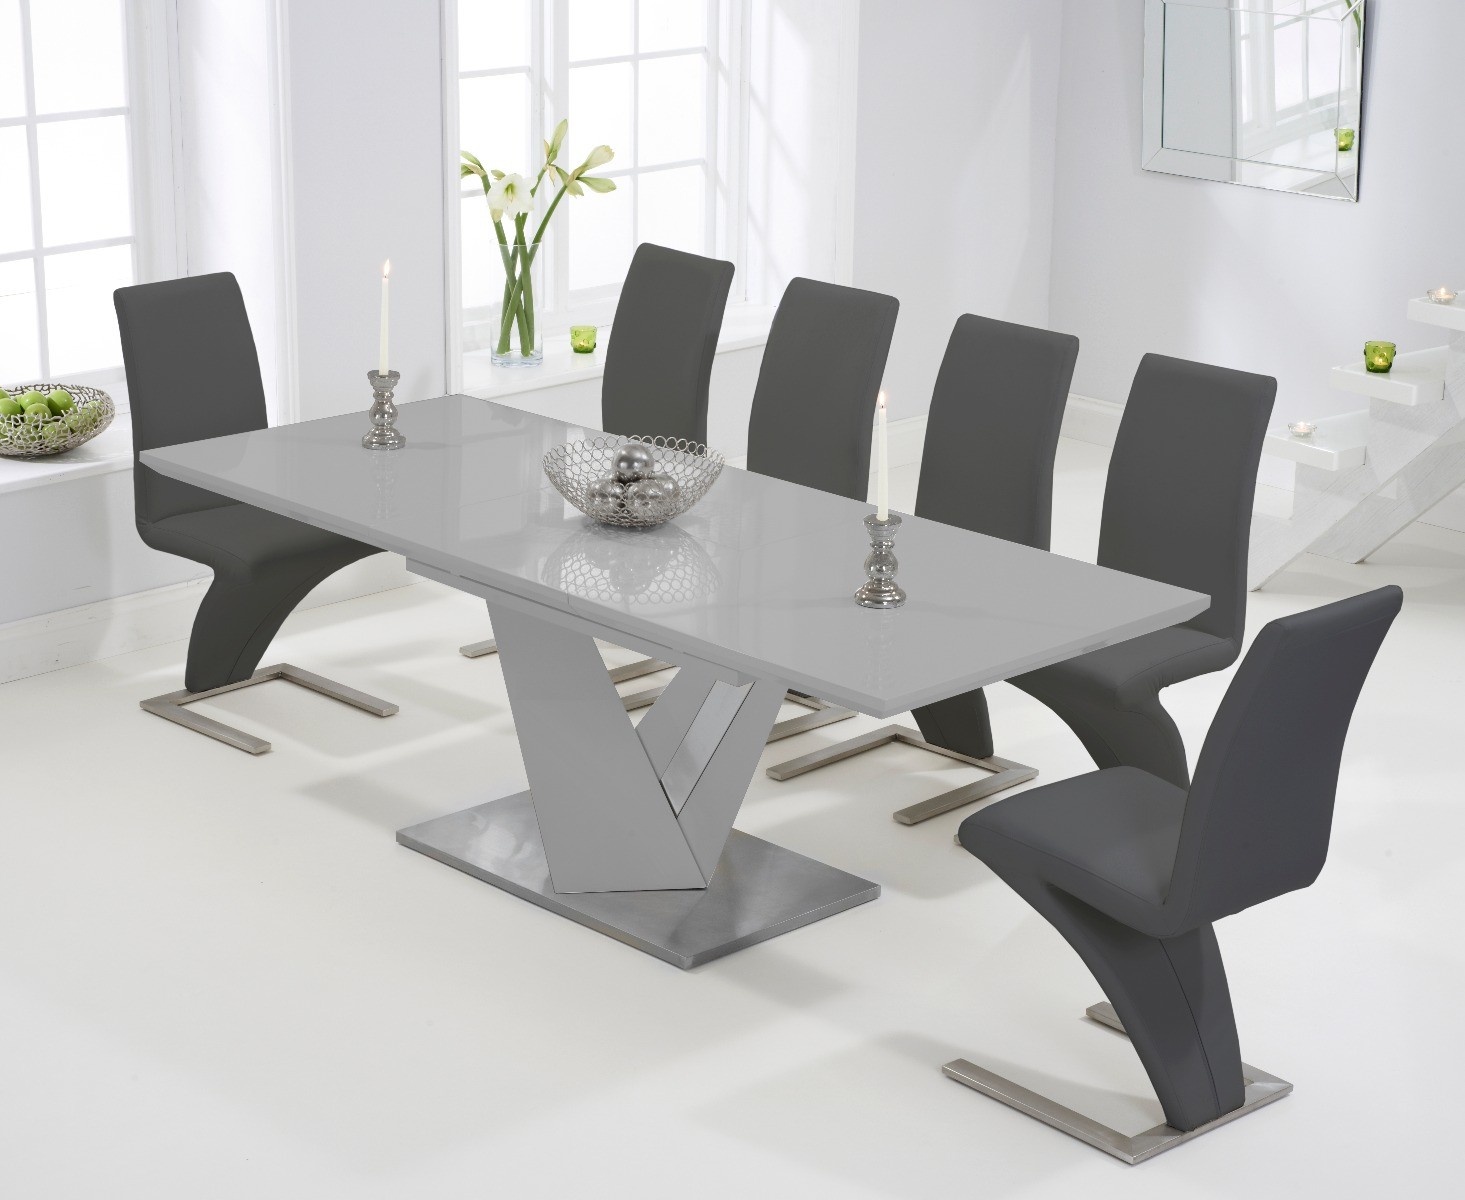 Harmony 160cm Extending Light Grey High Gloss Dining Table With 6 Grey Hampstead Z Chairs